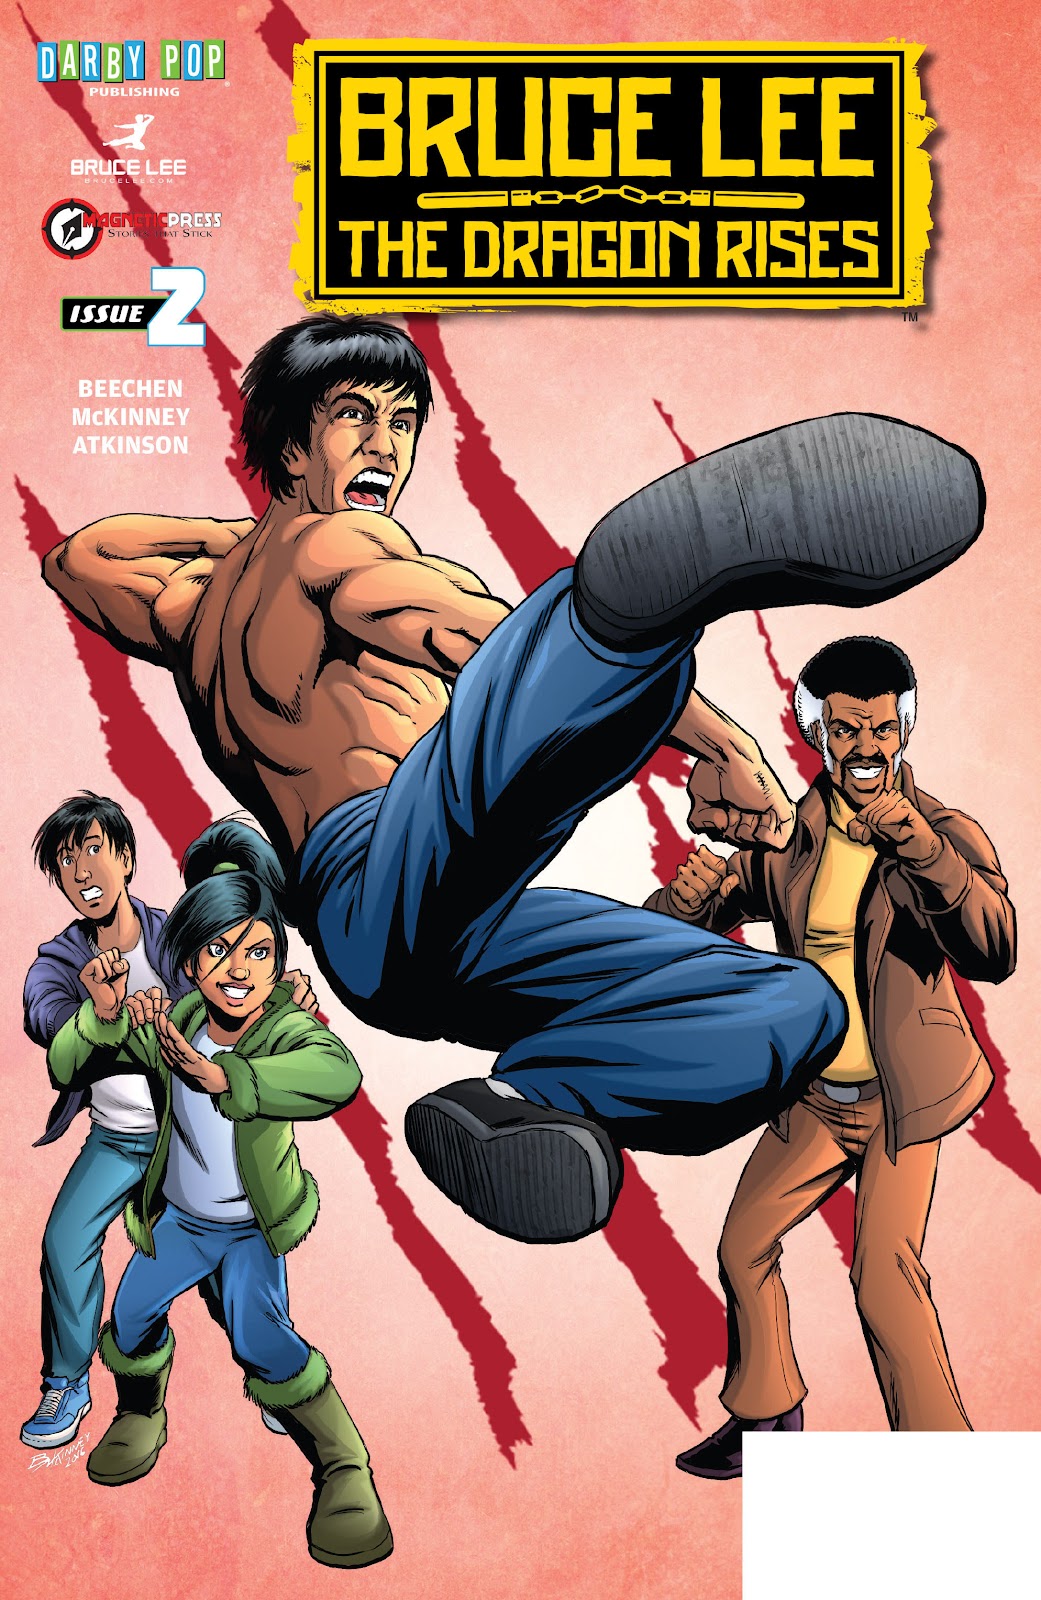 geef de bloem water Soms soms Scepticisme Read Bruce Lee: The Dragon Rises Issue #2 Online